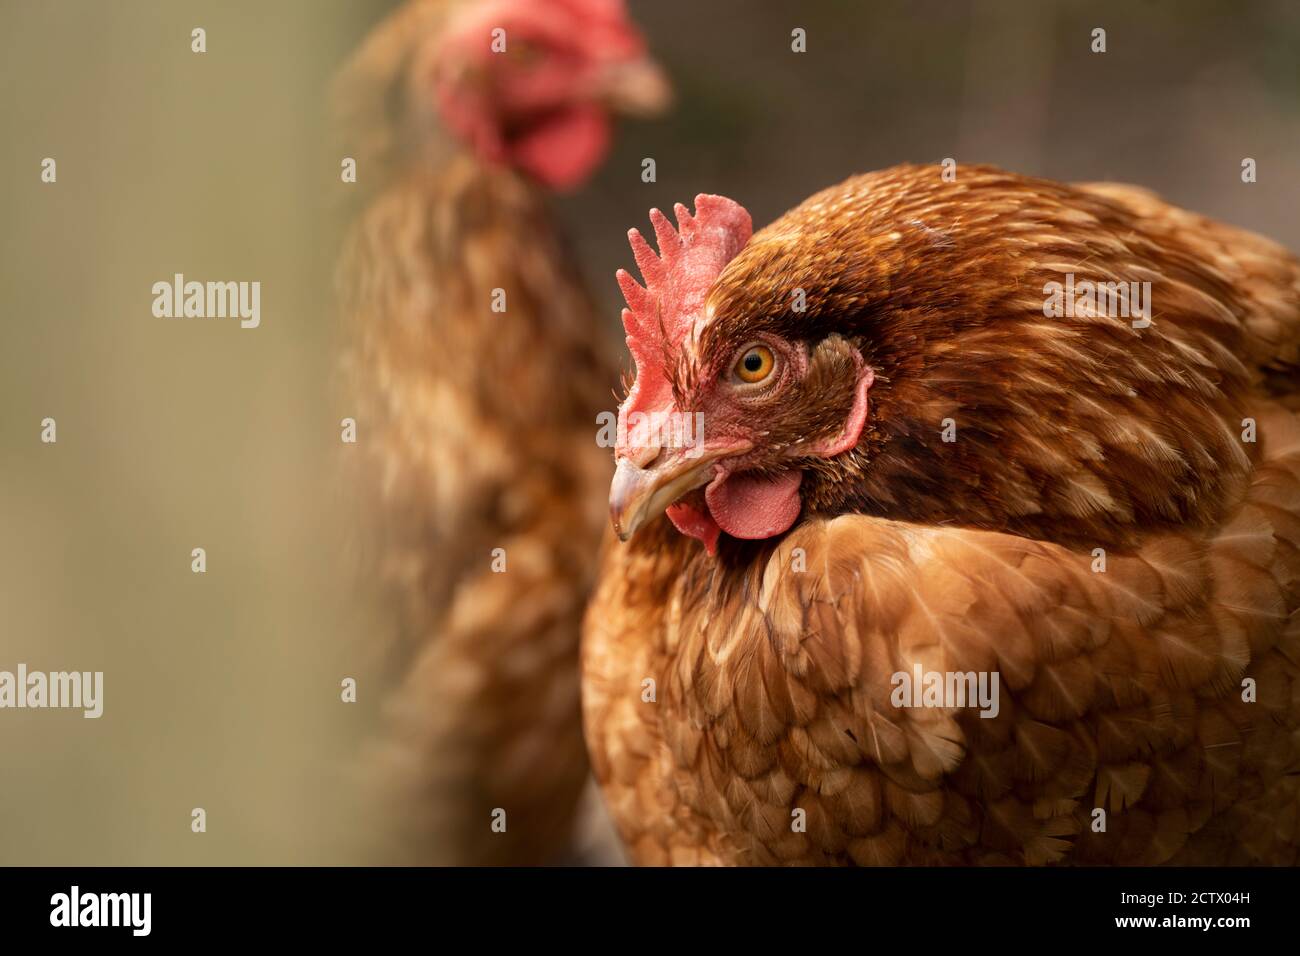 Hens inside an enclosure, Isles of Scilly. Stock Photo